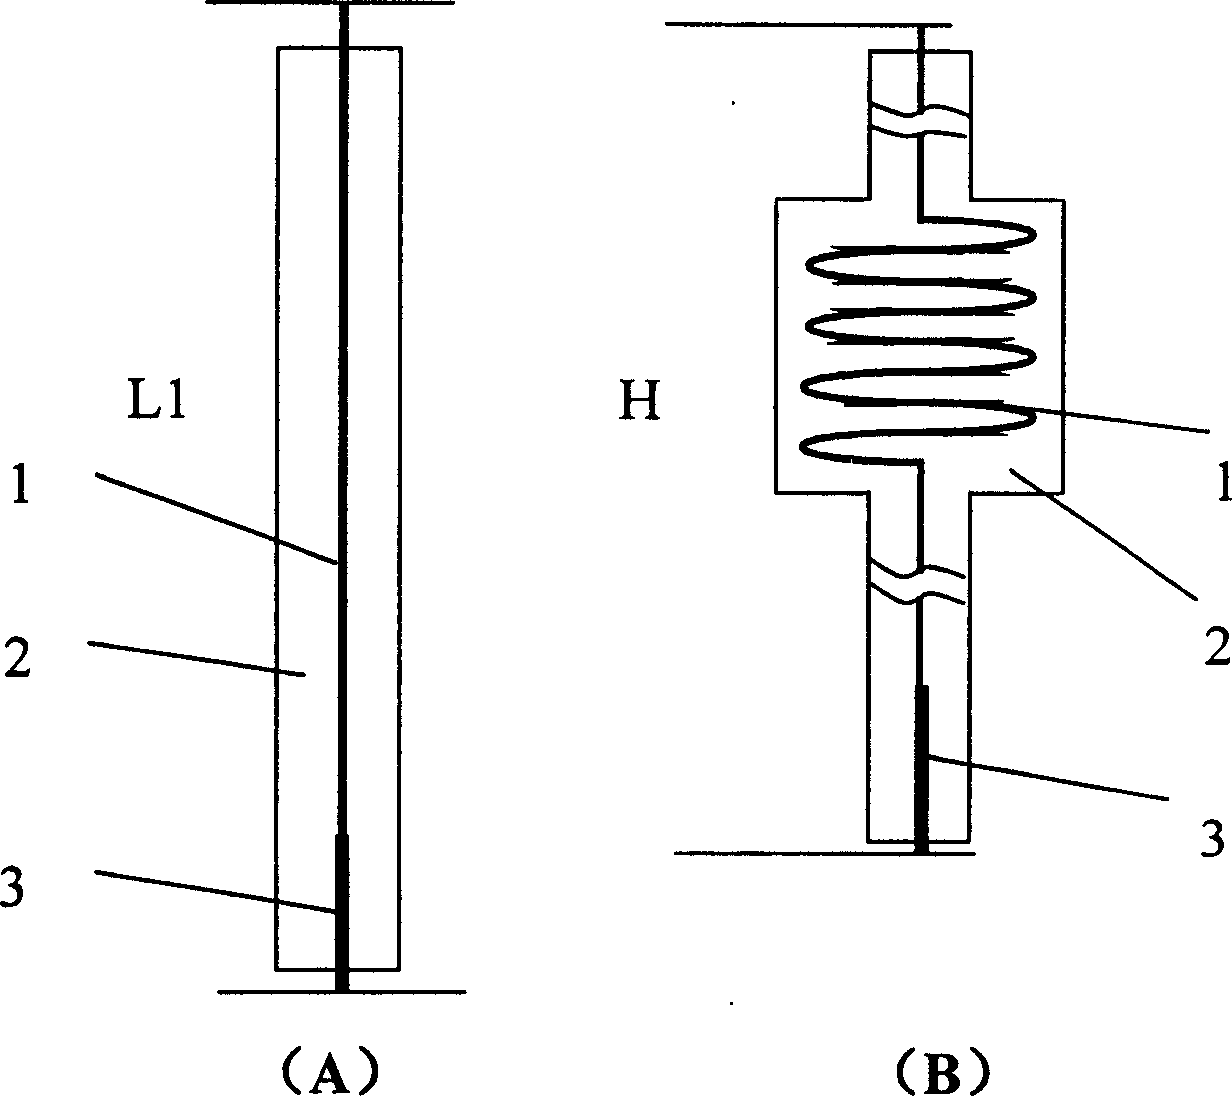 Current lead wire of superconducting device